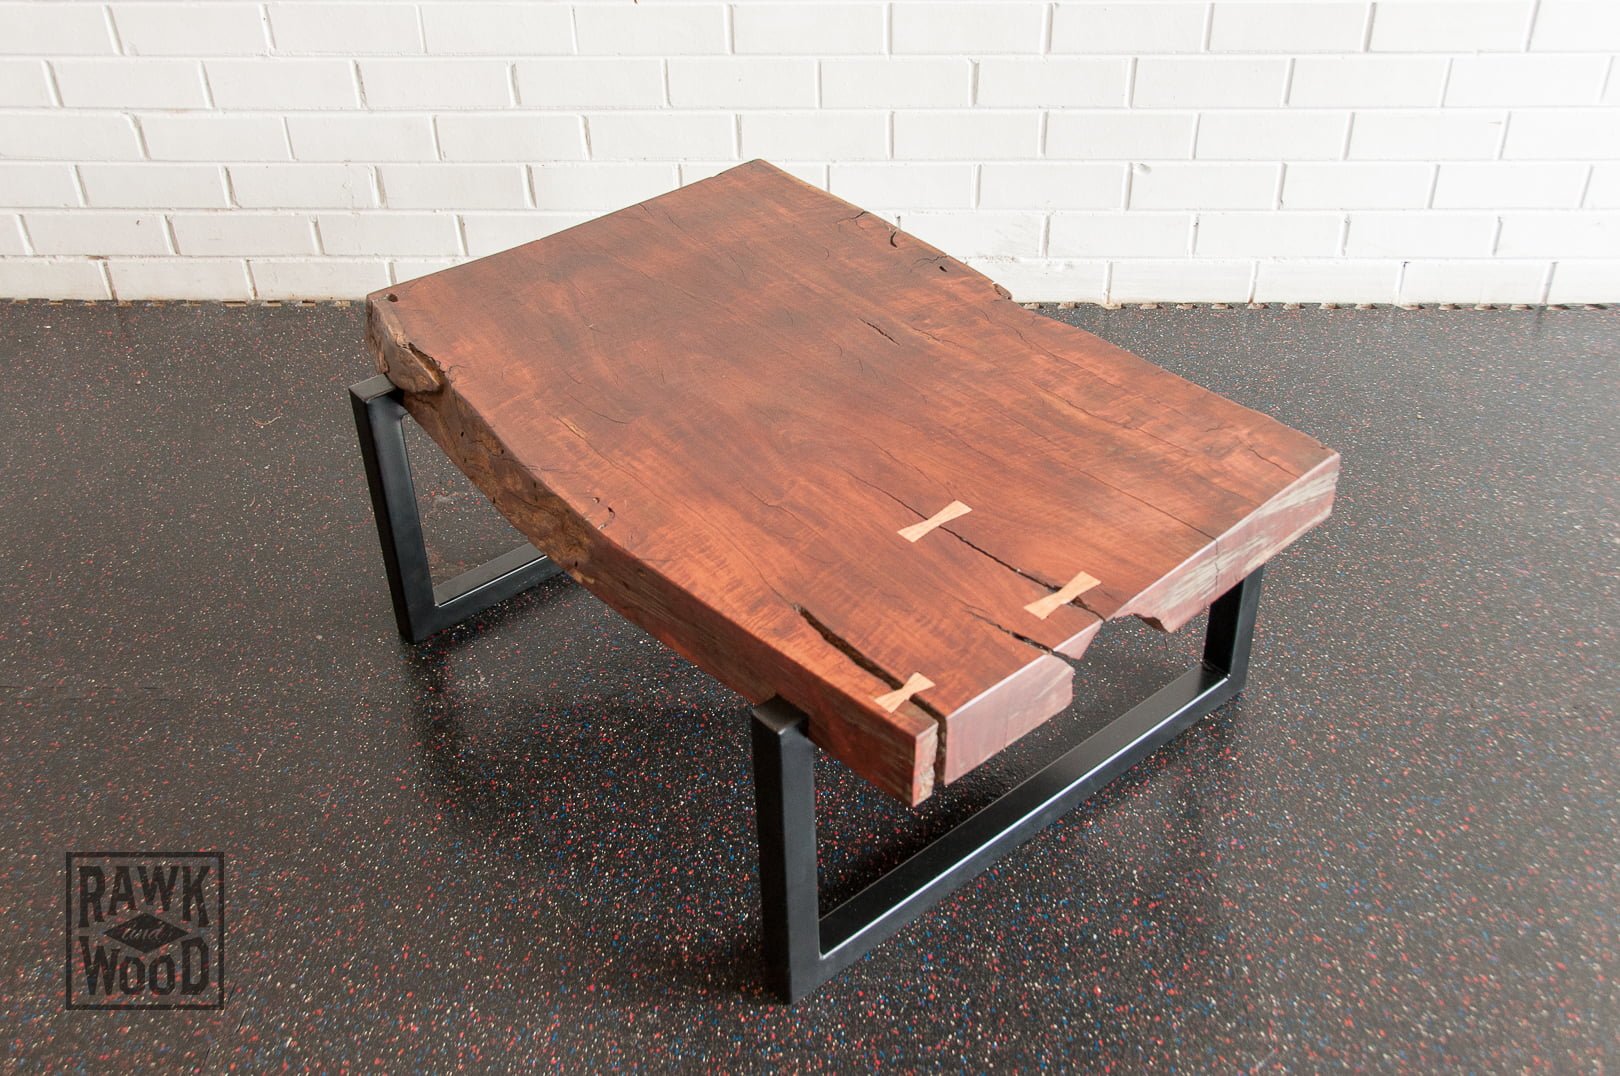 Recycled-Timber-Coffee-Table, made in Melbourne by Rawk and Wood